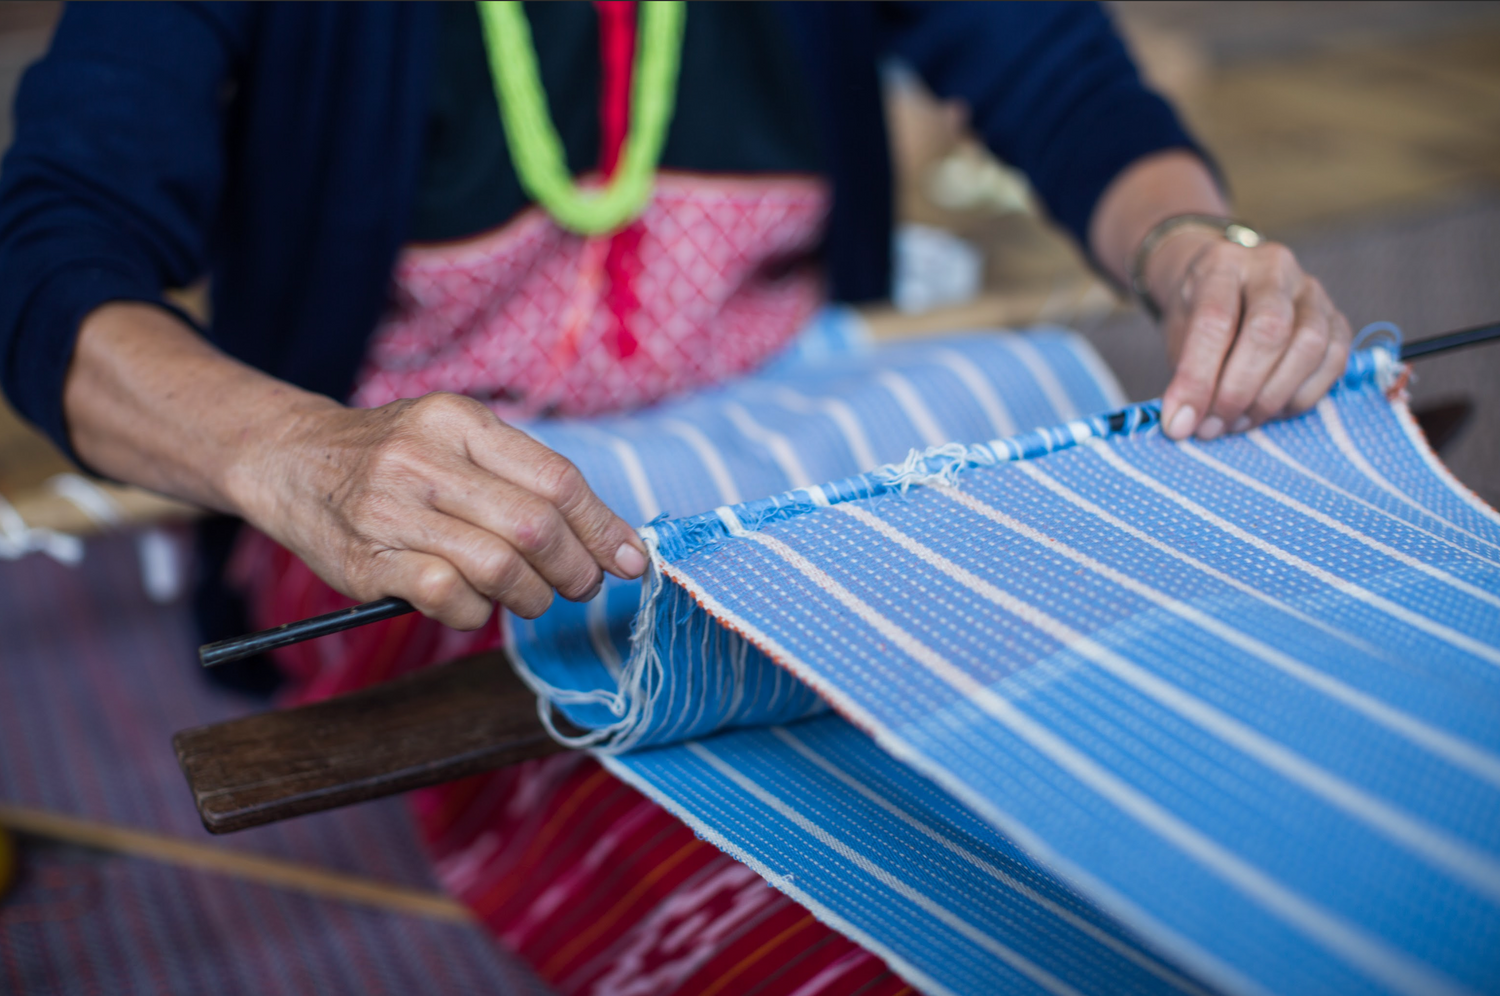 Woman working on creating the fabric for a table runner